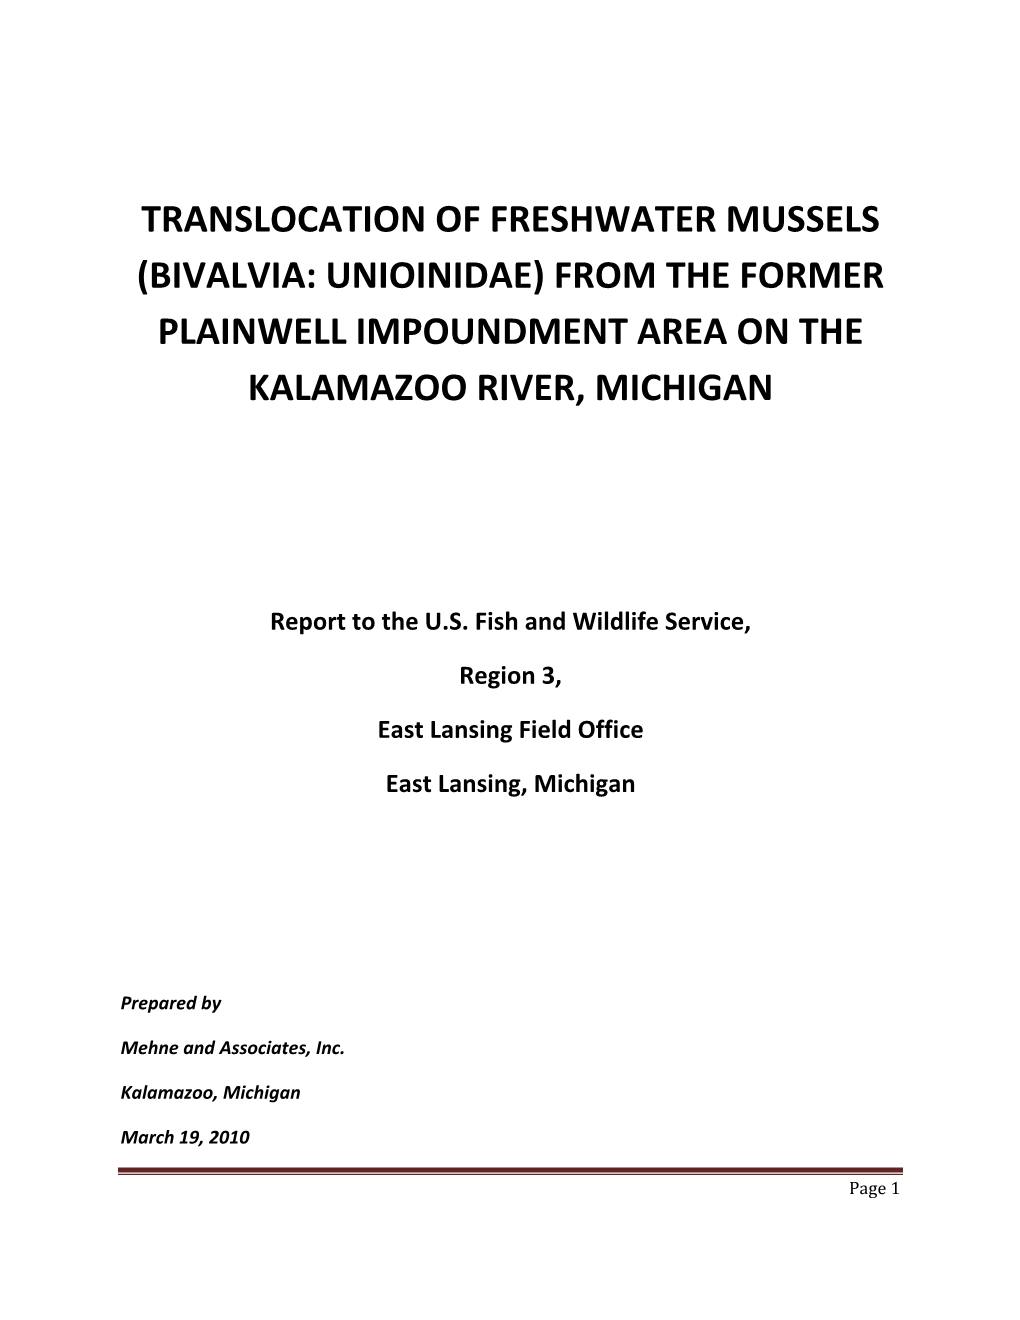 Translocation of Freshwater Mussels (Bivalvia: Unioinidae) from the Former Plainwell Impoundment Area on the Kalamazoo River, Michigan